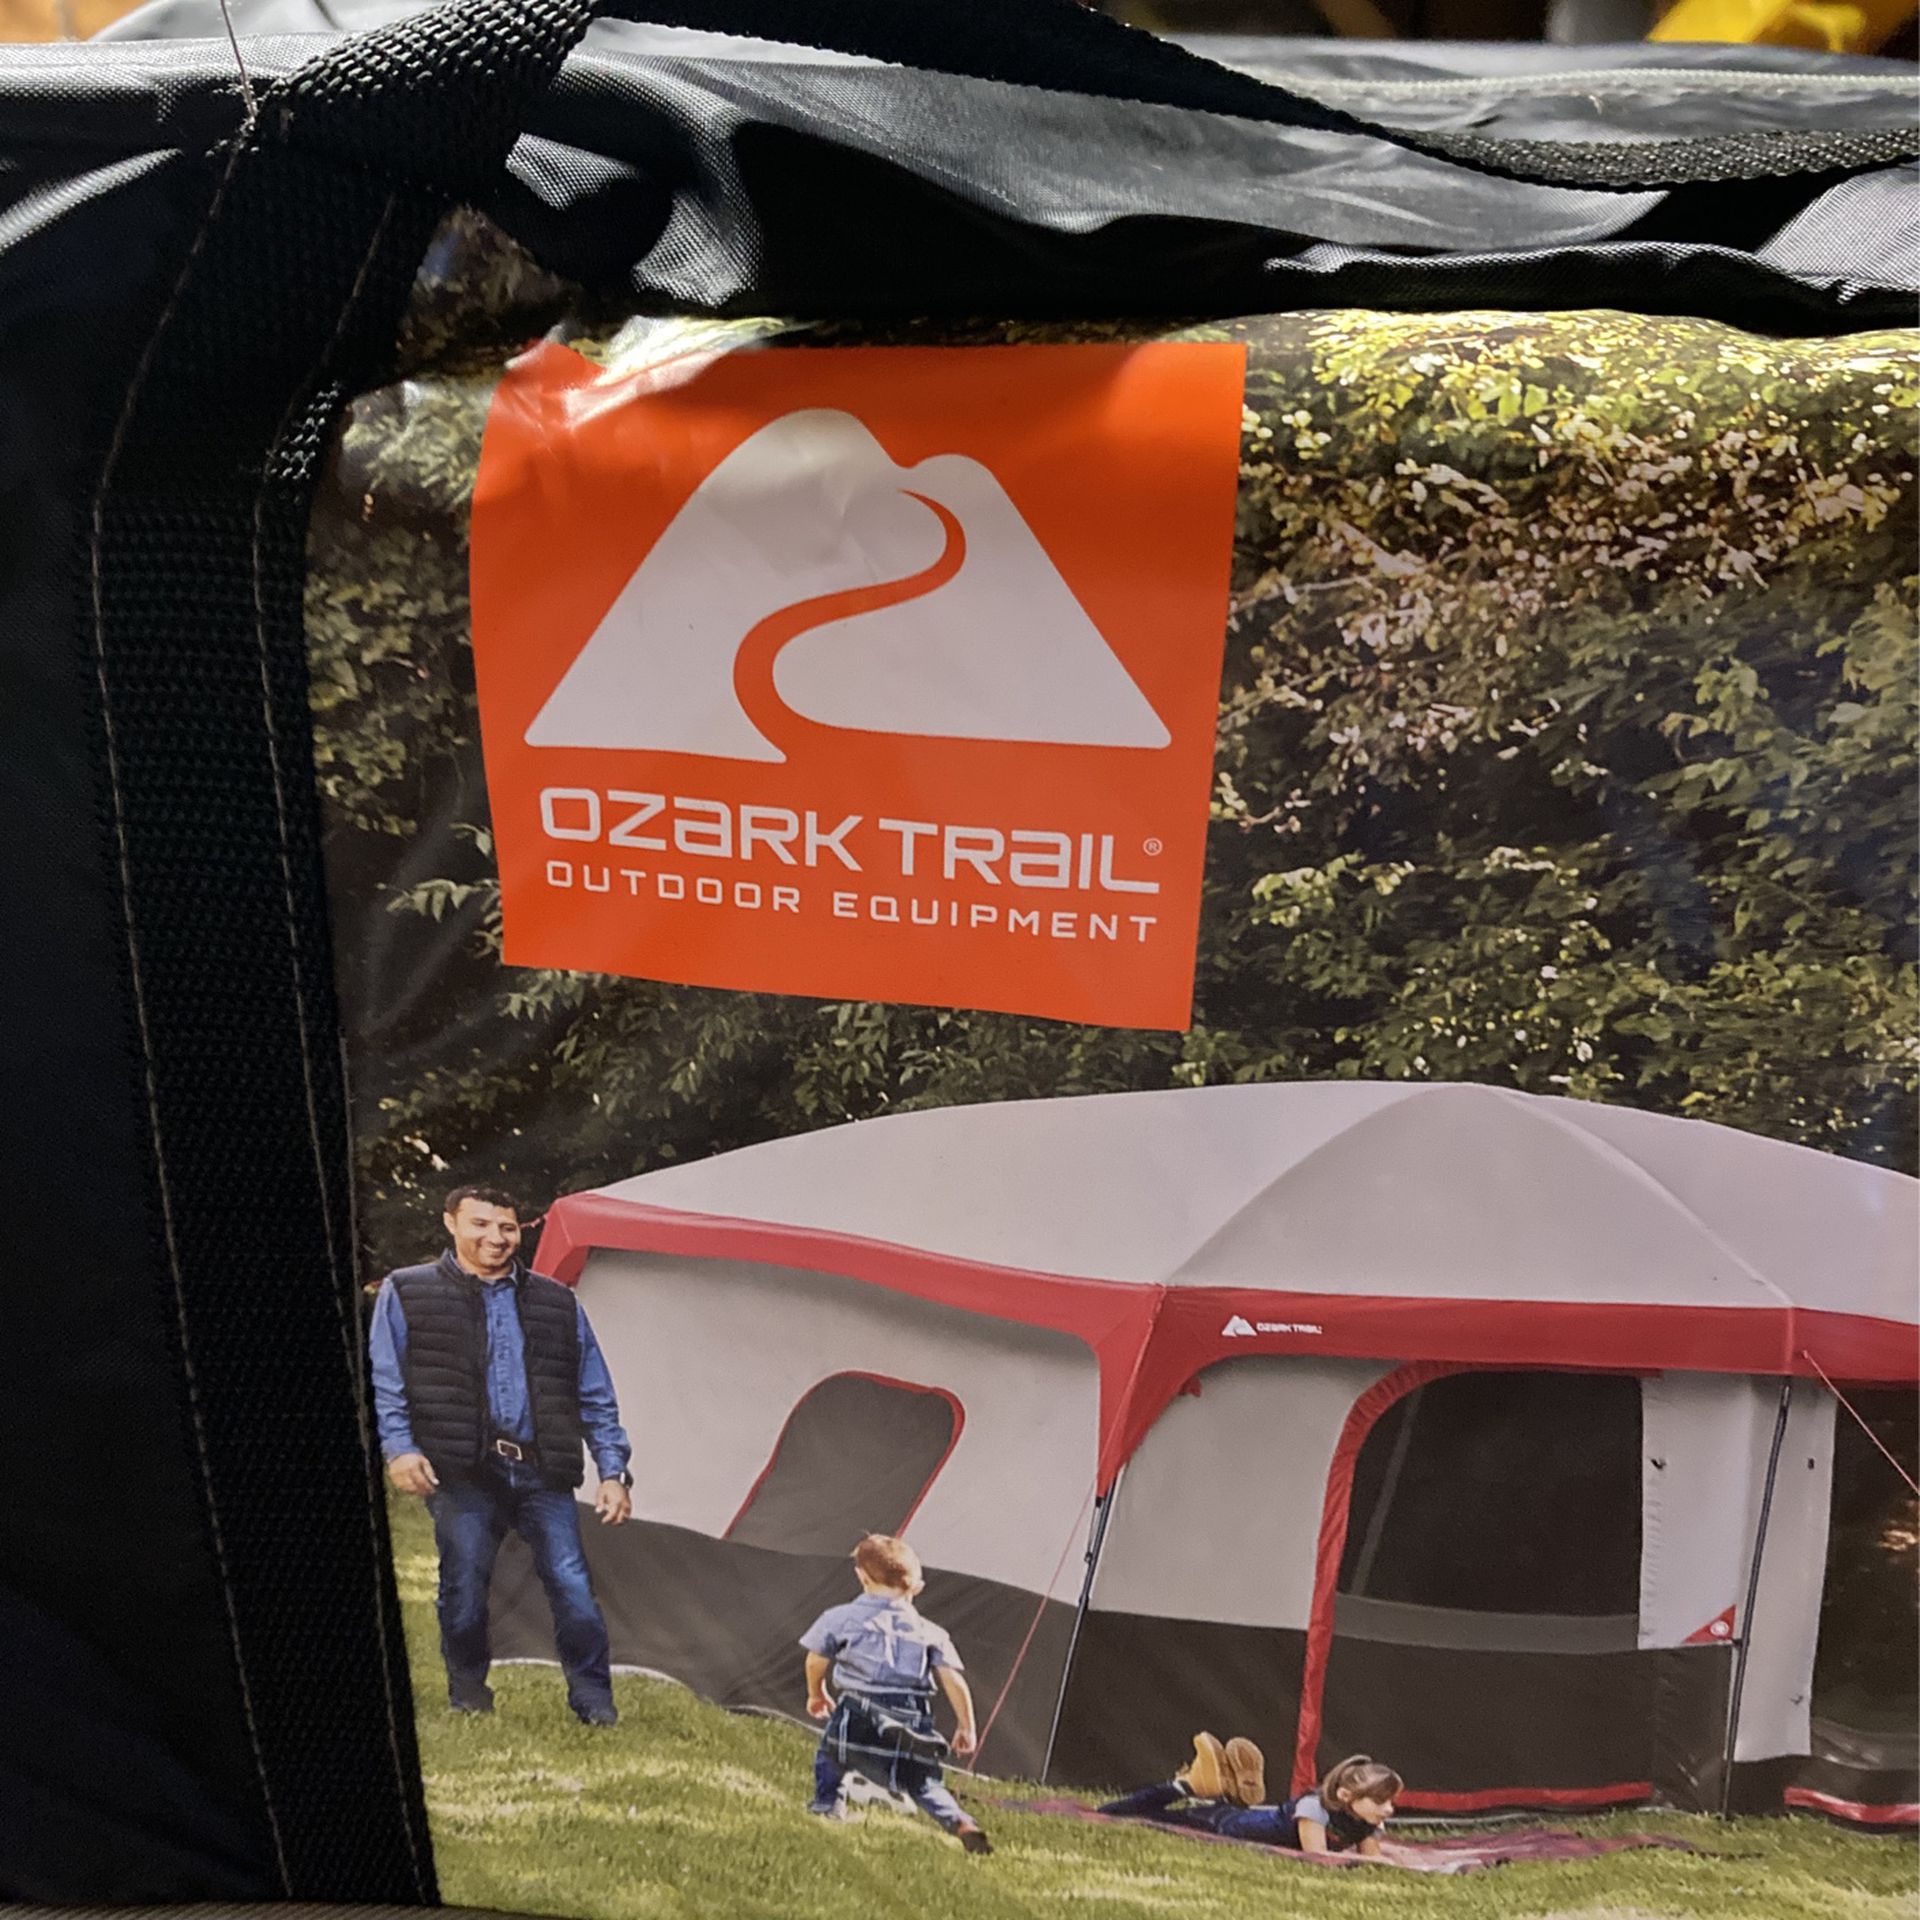 12 Man ,two Room Tent Brand new Never Used  Still Have Receipts I Paid 200 Sell For 150